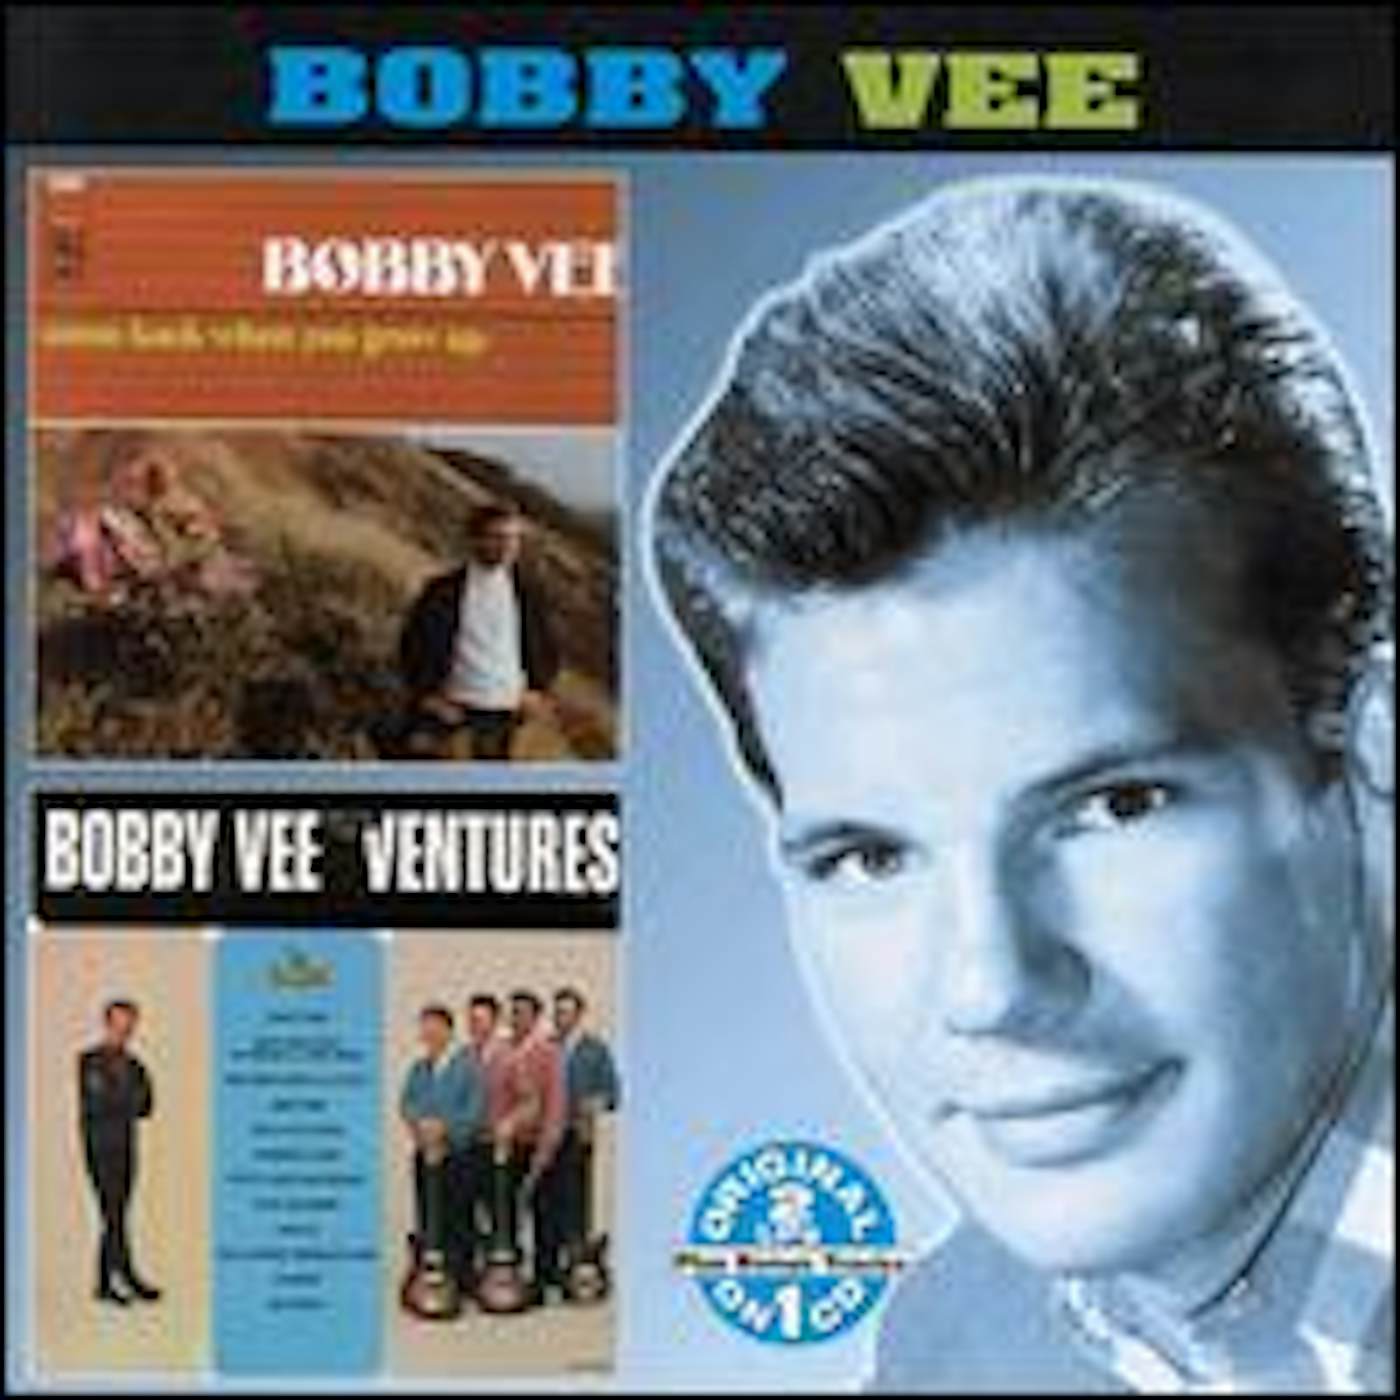 Bobby Vee COME BACK WHEN YOU GROW UP / MEETS THE VENTURES CD